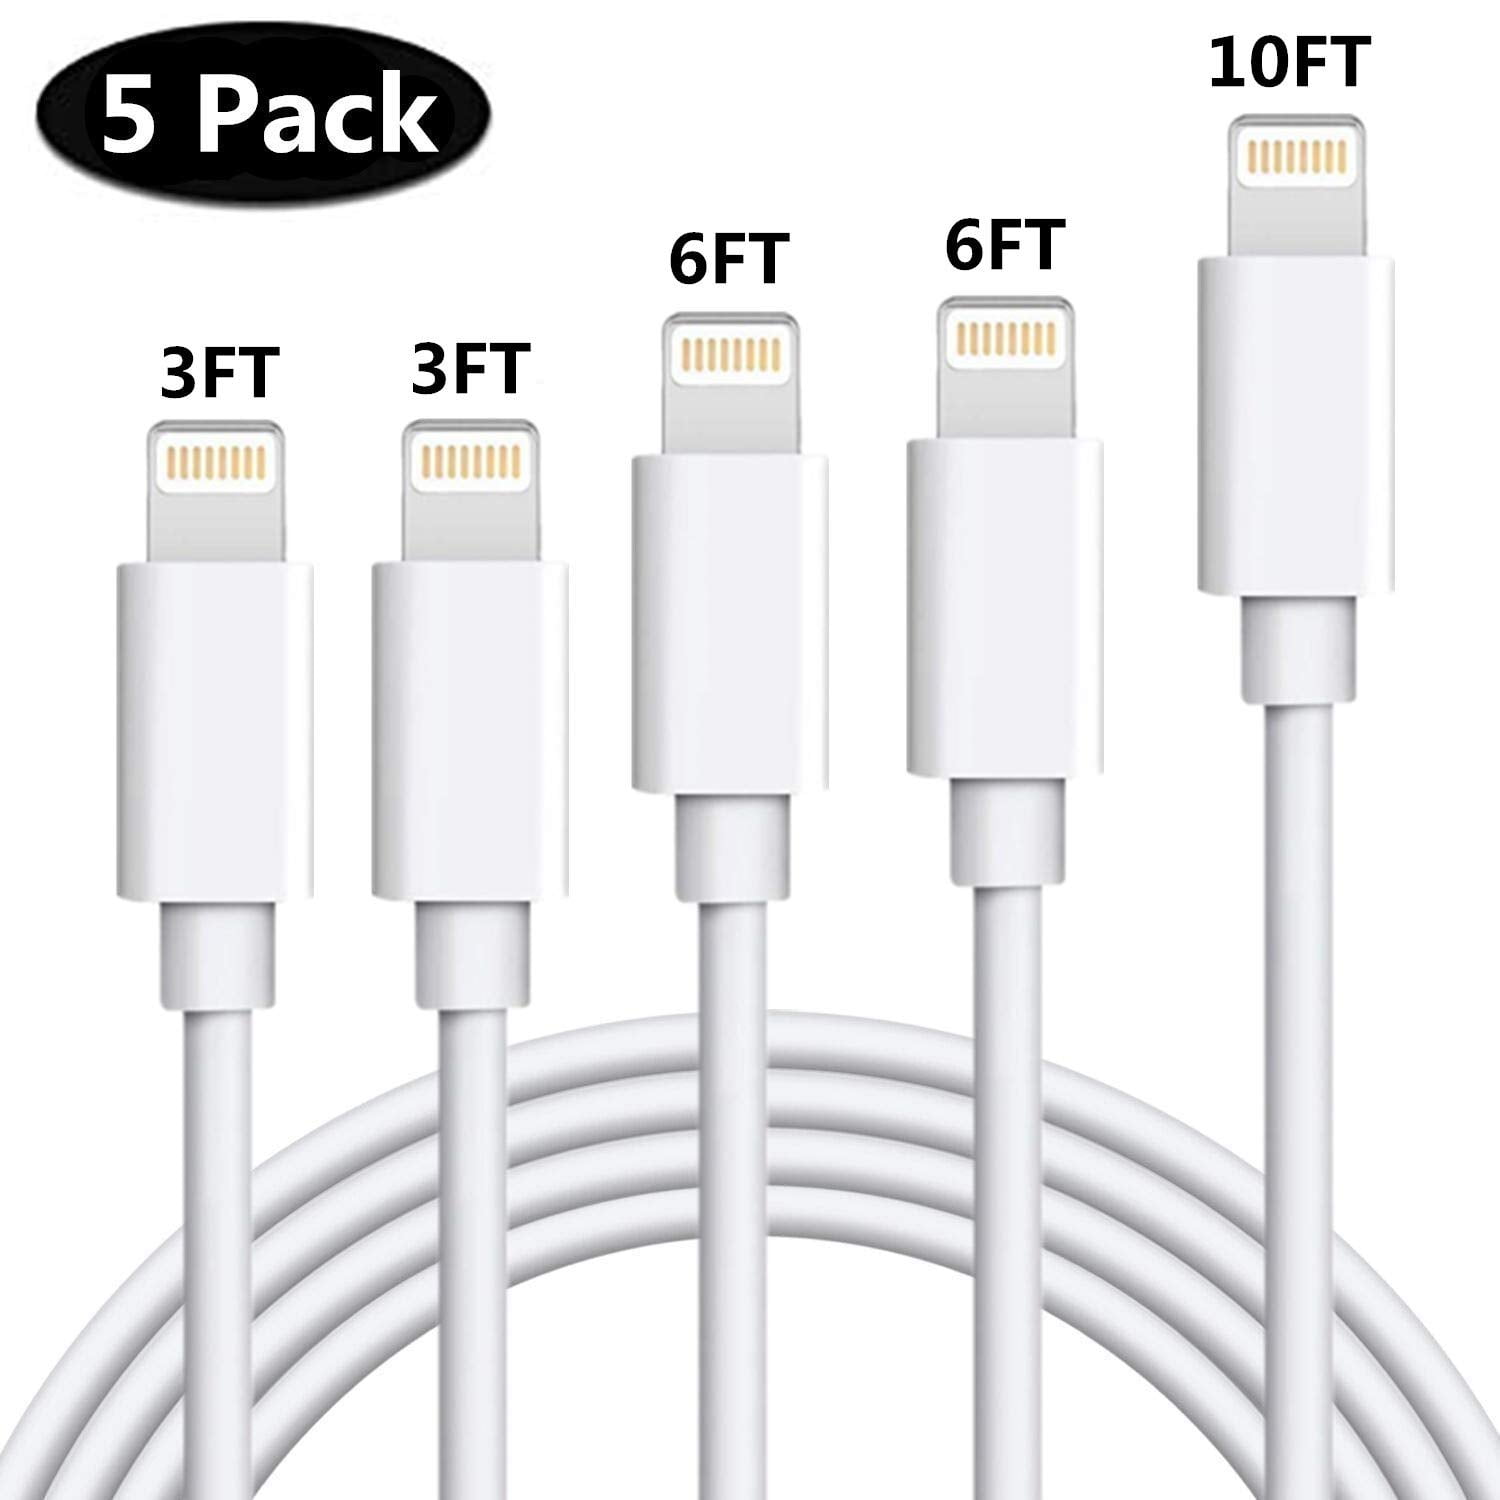 3/3/6/6/10FT MFi Certified iPhone Cable 5 Pack Extra Long Nylon Braided USB Charging&Syncing Cord Compatible with iPhone Xs Max/XS/XR/7/7Plus/X/8/8Plus/6S/6S Plus/SE Silver&Grey iPhone Charger